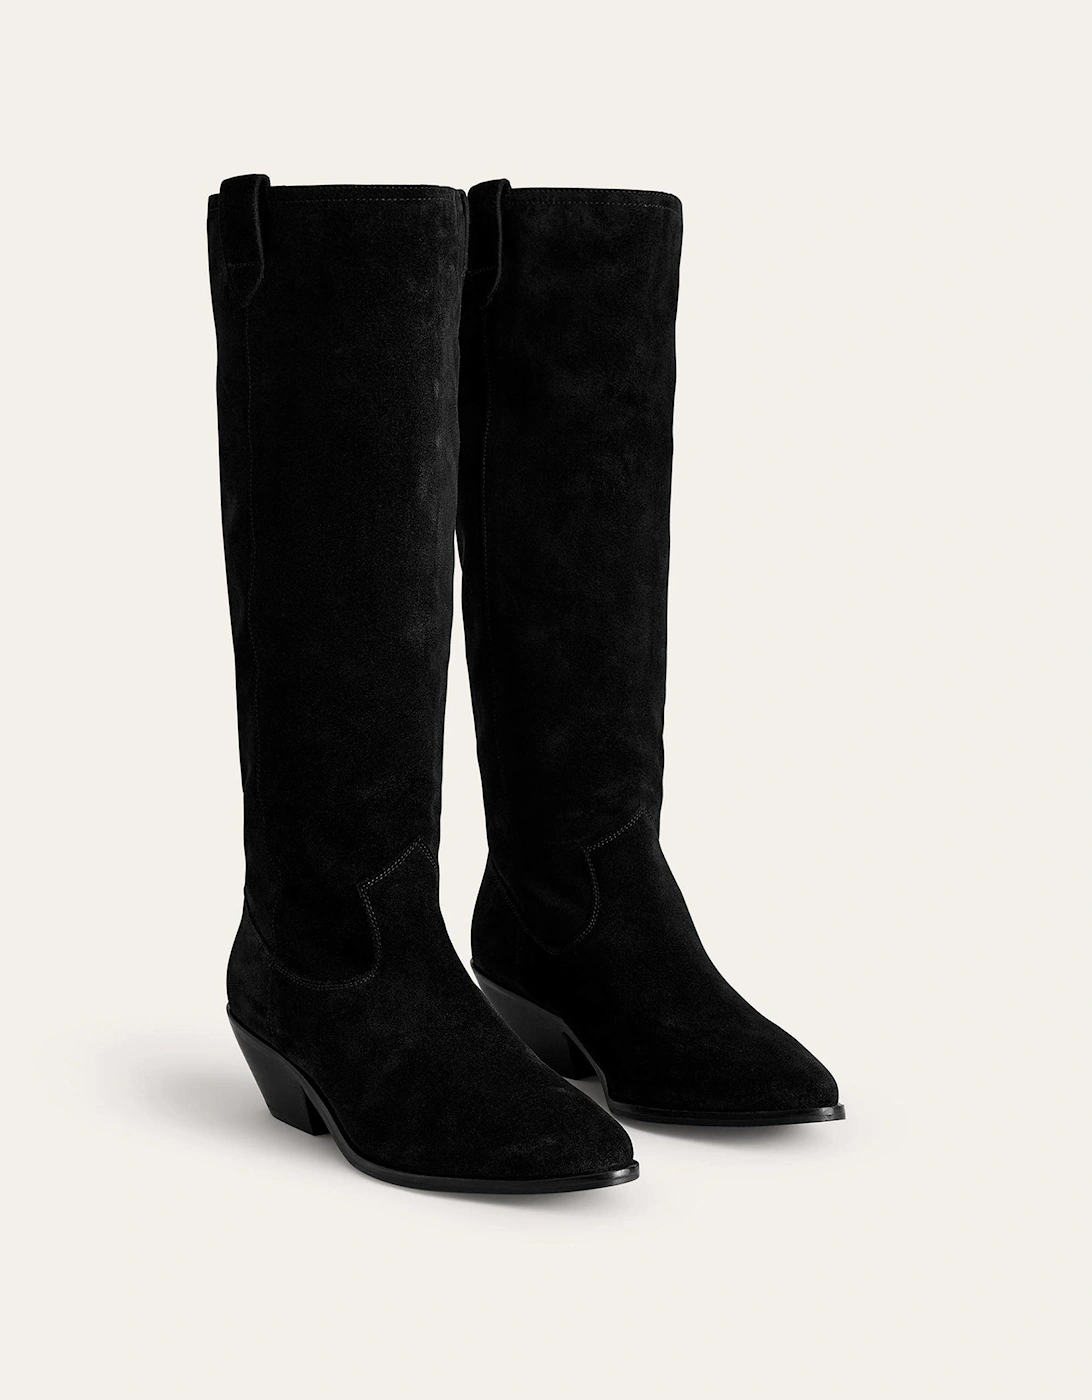 Western Knee High Boots